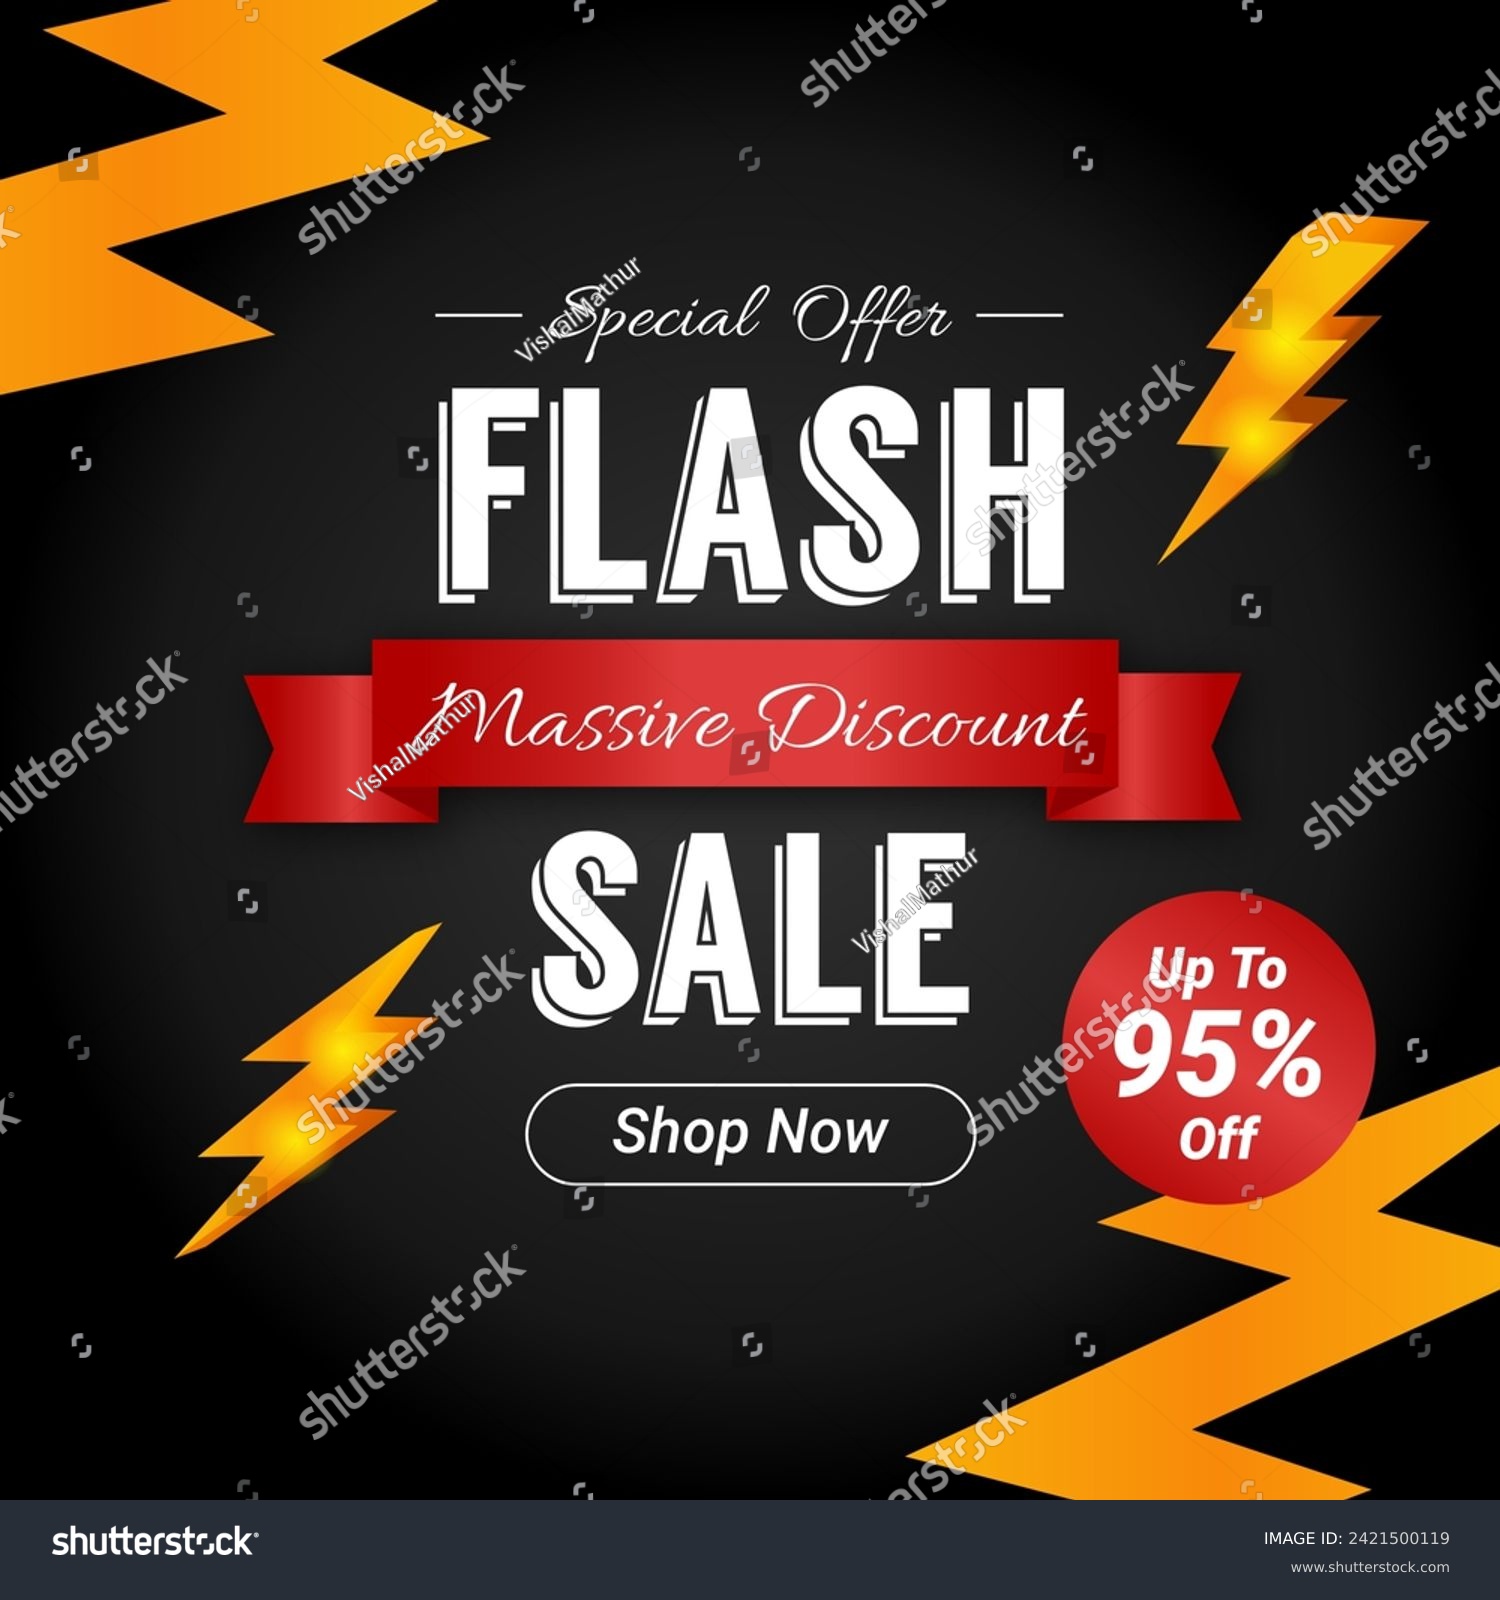 Flash Sale in Gold lightning background with up to 95% off. Massive Discount. Shop Now. Flash Sales banner with Gold lightning Icon. Special offer. #2421500119